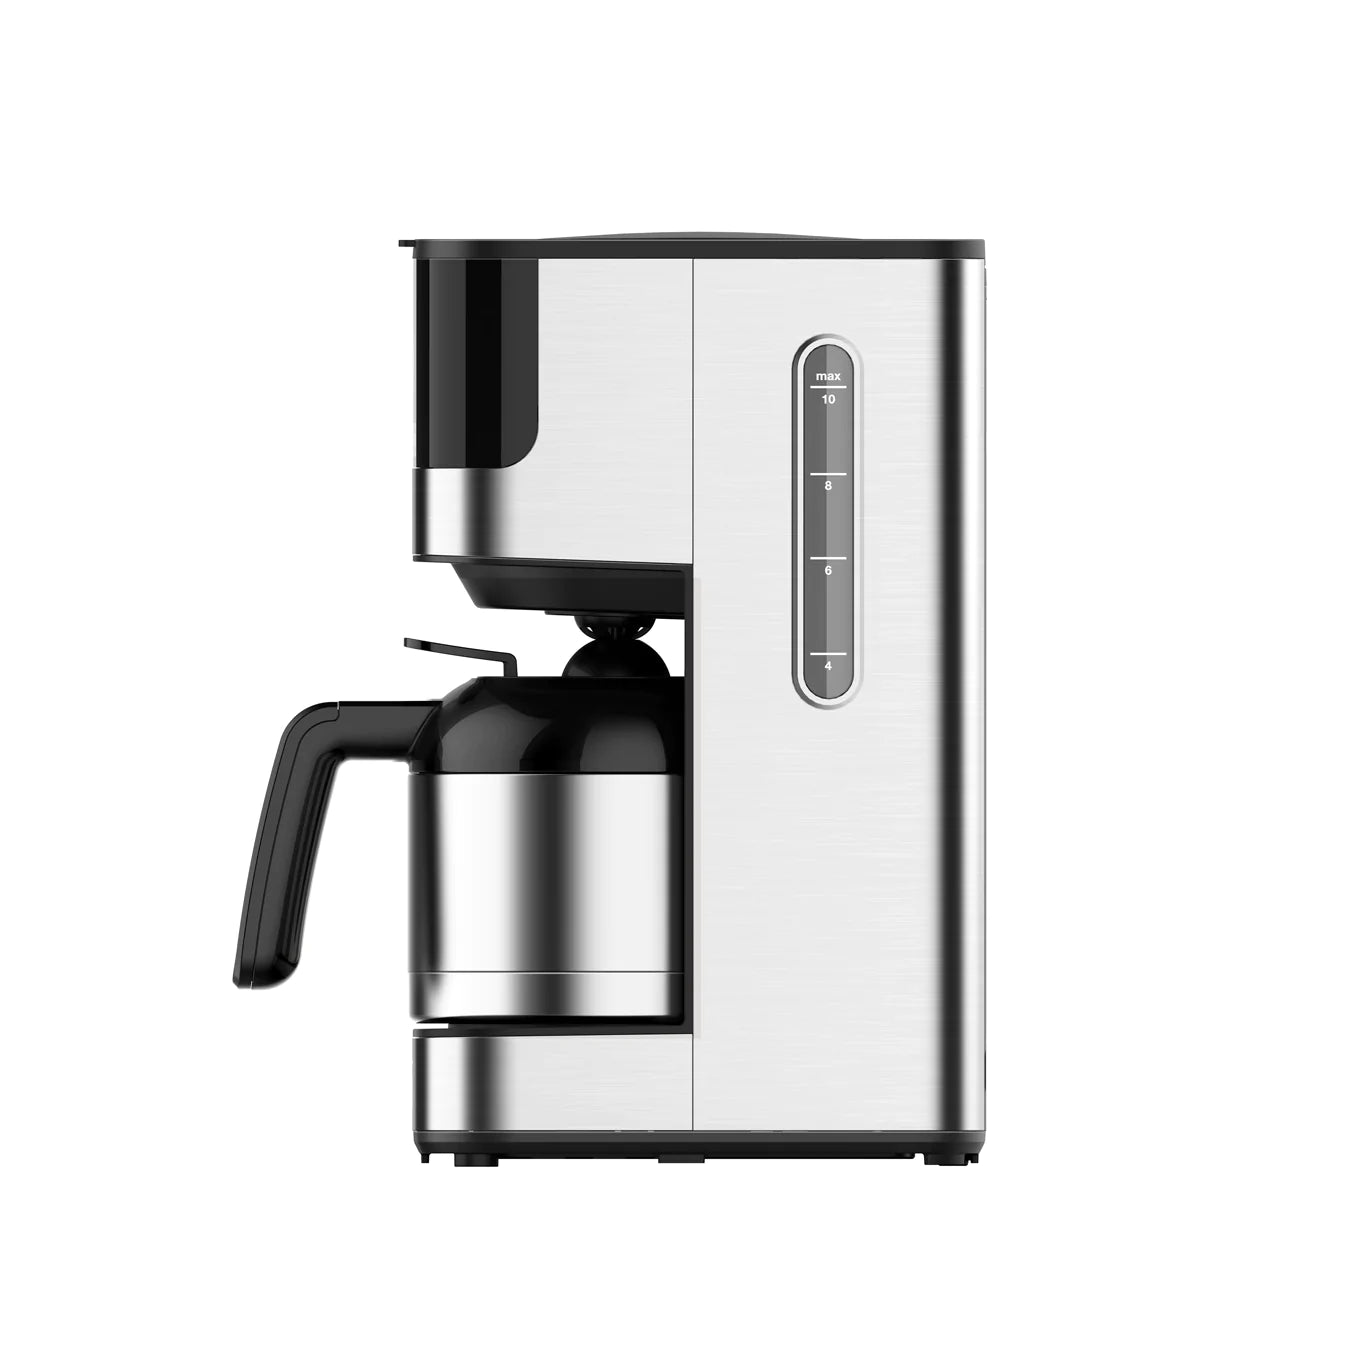 Drip Coffee Maker with Thermal Carafe